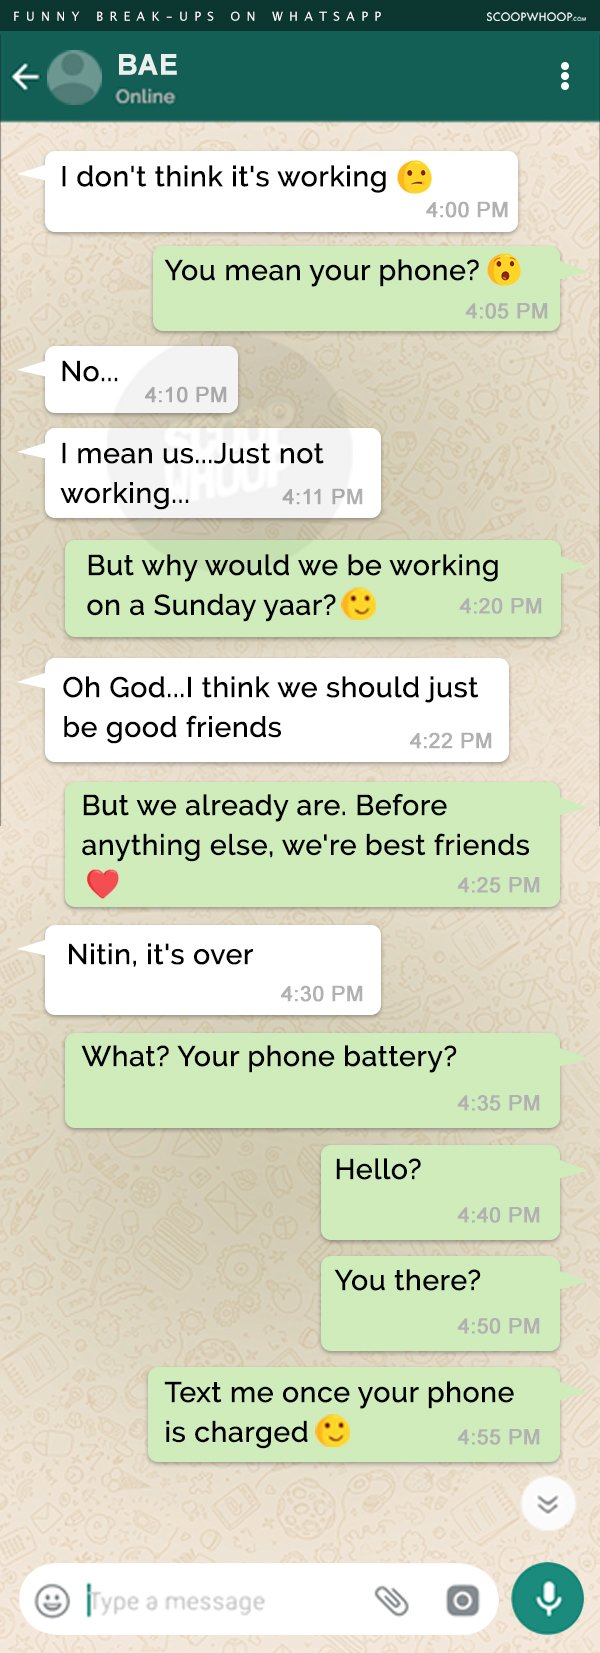 After Reading These Break-up Messages On WhatsApp, You'll Be ...